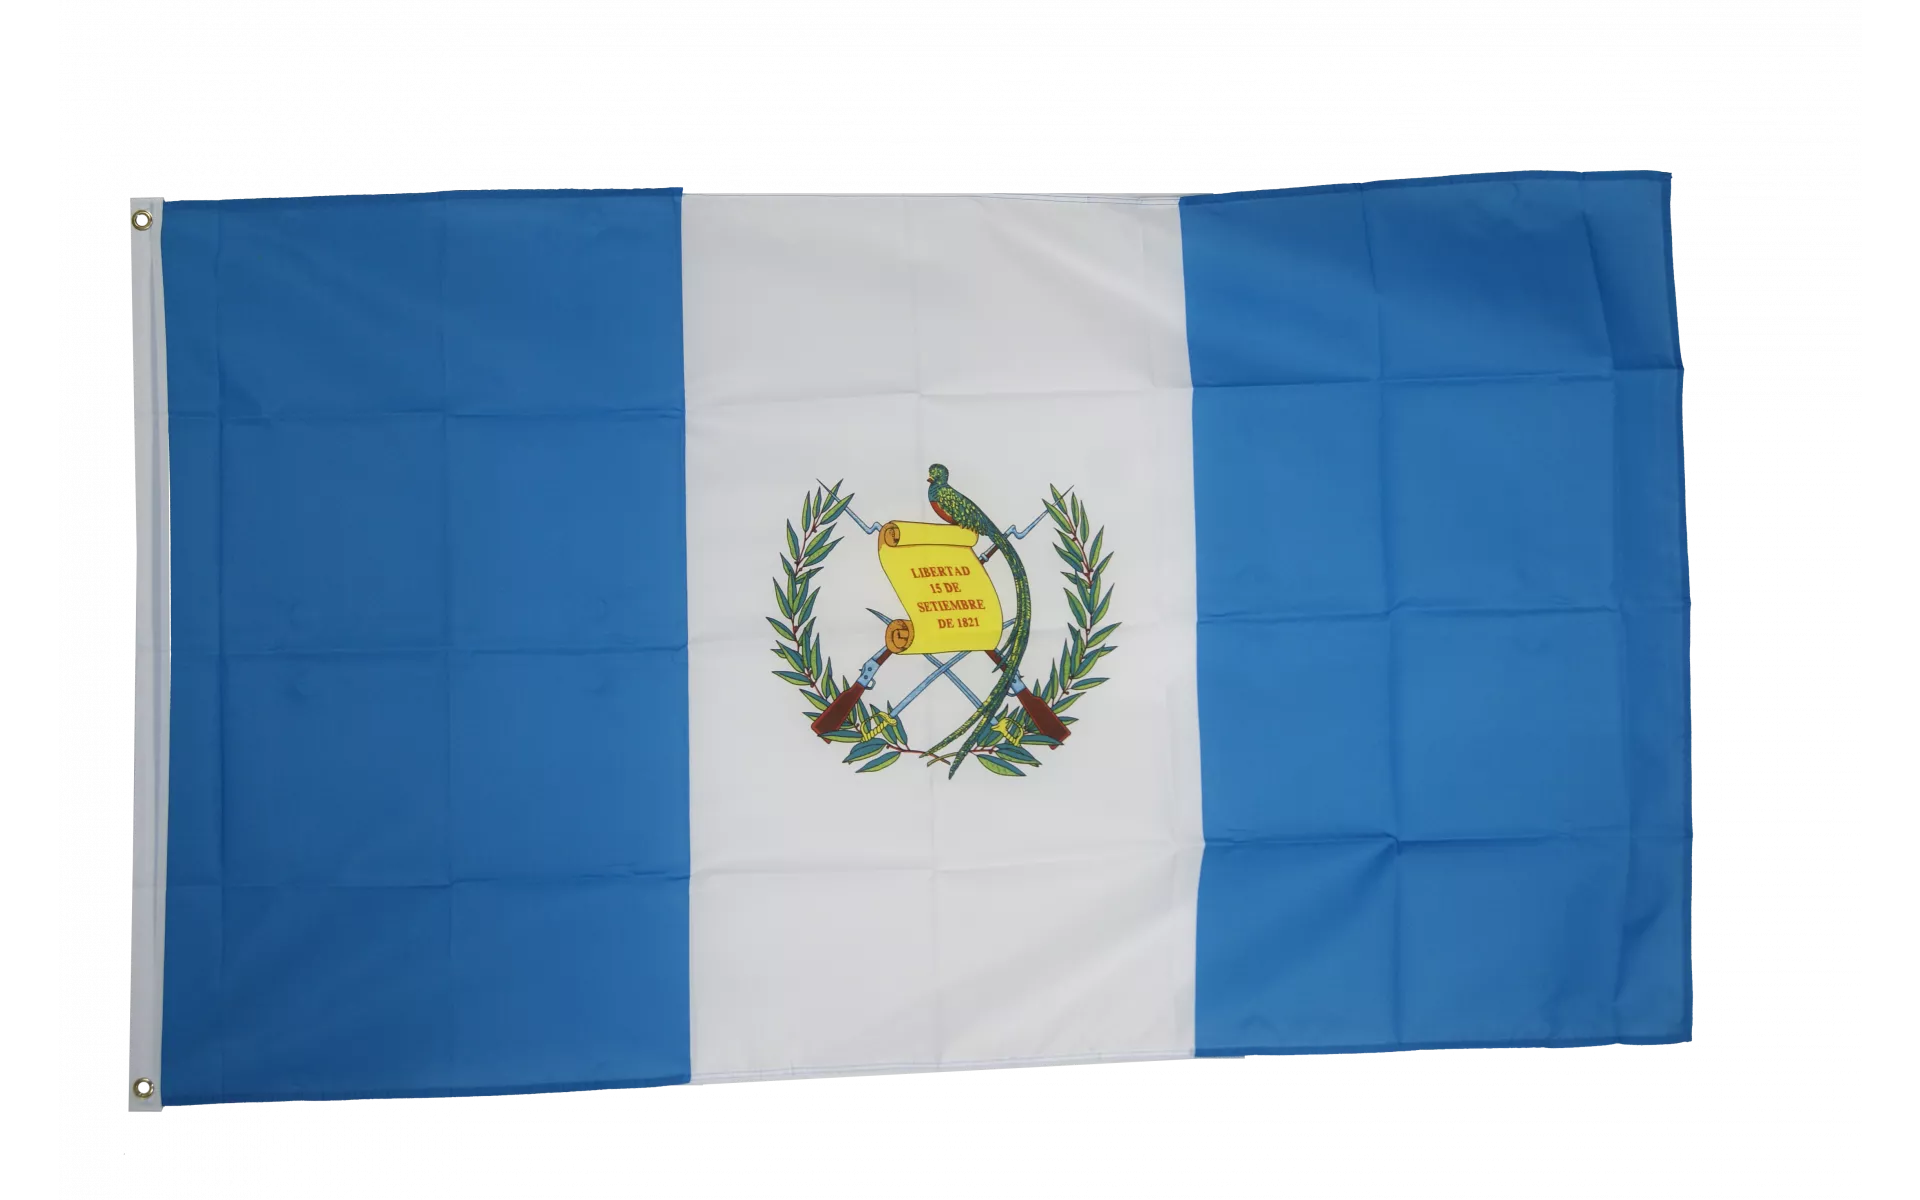 Vinyl Banner Sign Guatemala Flag Logo Blue White Countries Marketing Advertising Blue 4 Grommets Multiple Sizes Available 28inx70in Set of 2 